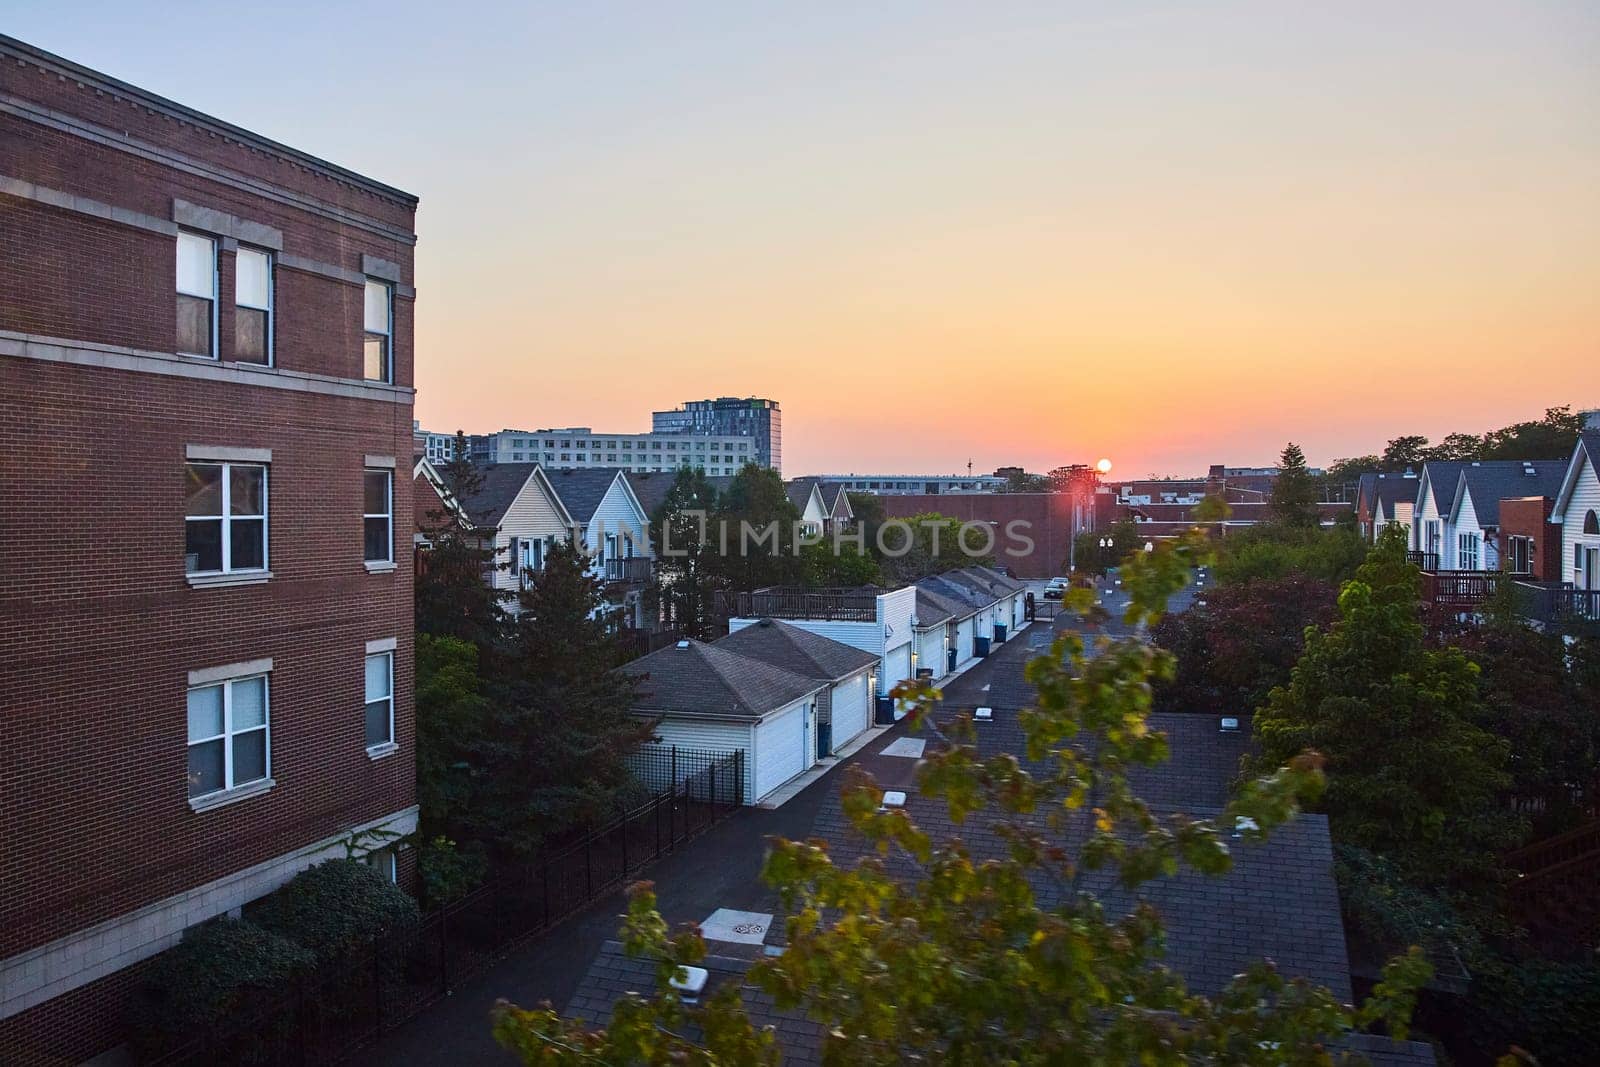 Sun in distance rising over city buildings with rows of houses in Chicago, IL at sunset by njproductions